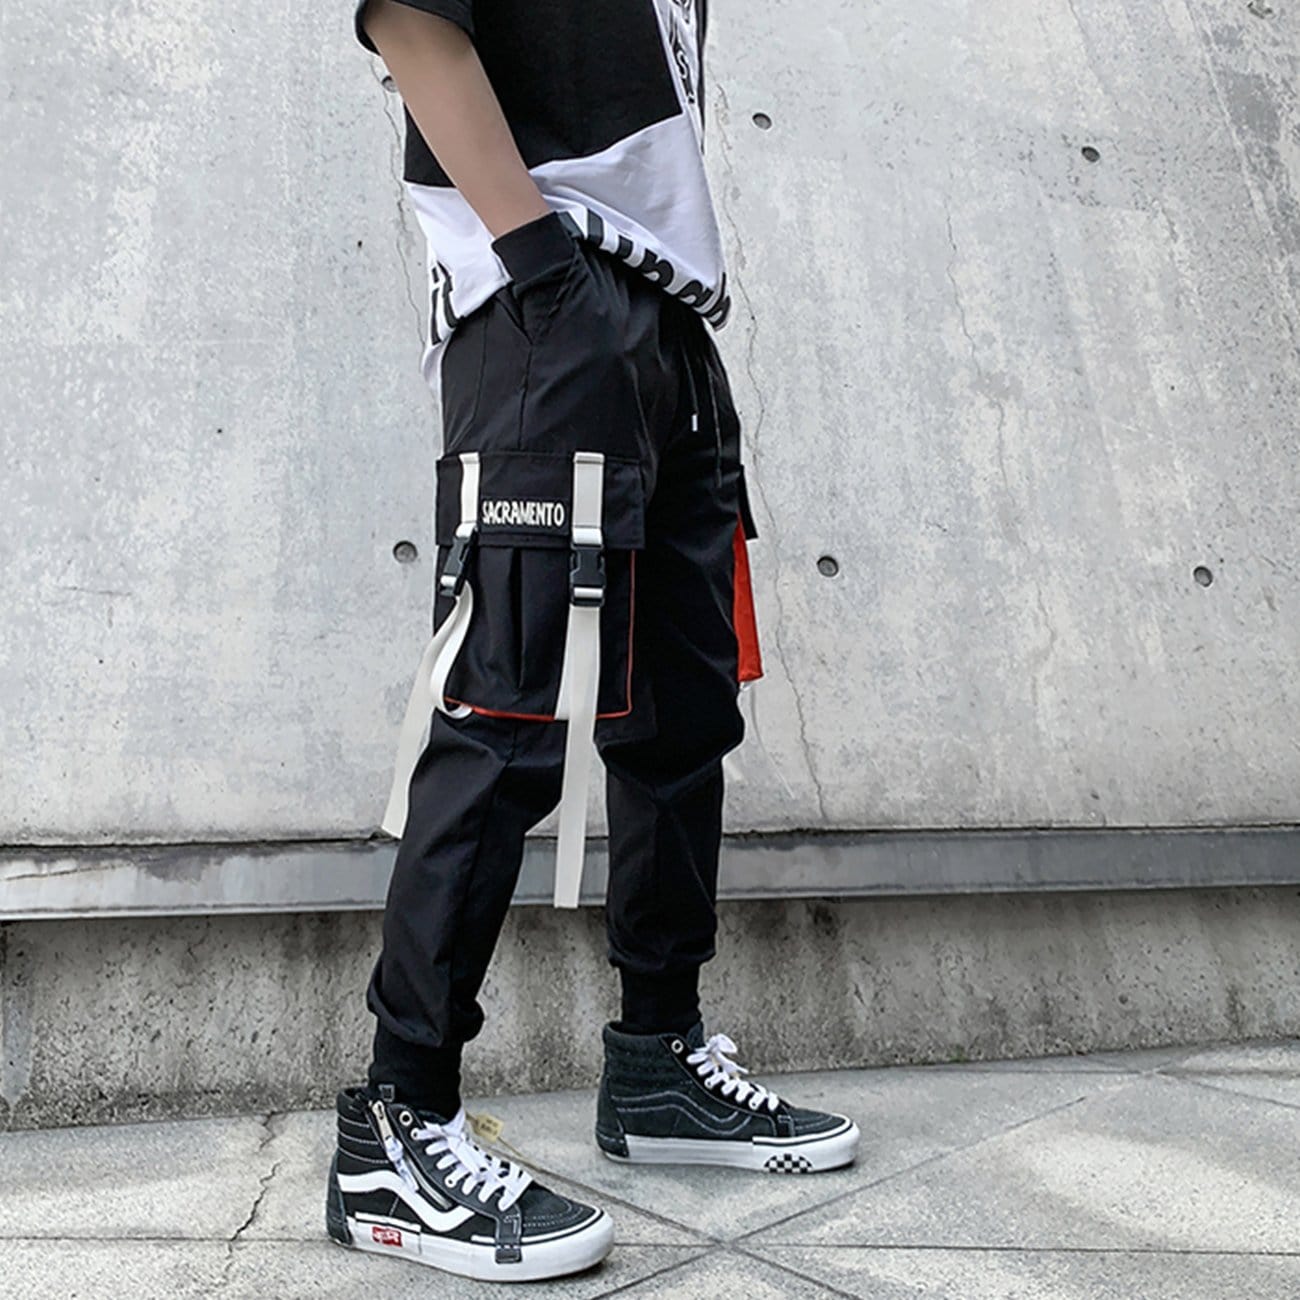 TO Techwear Patchwork Ribbons Cargo Pants